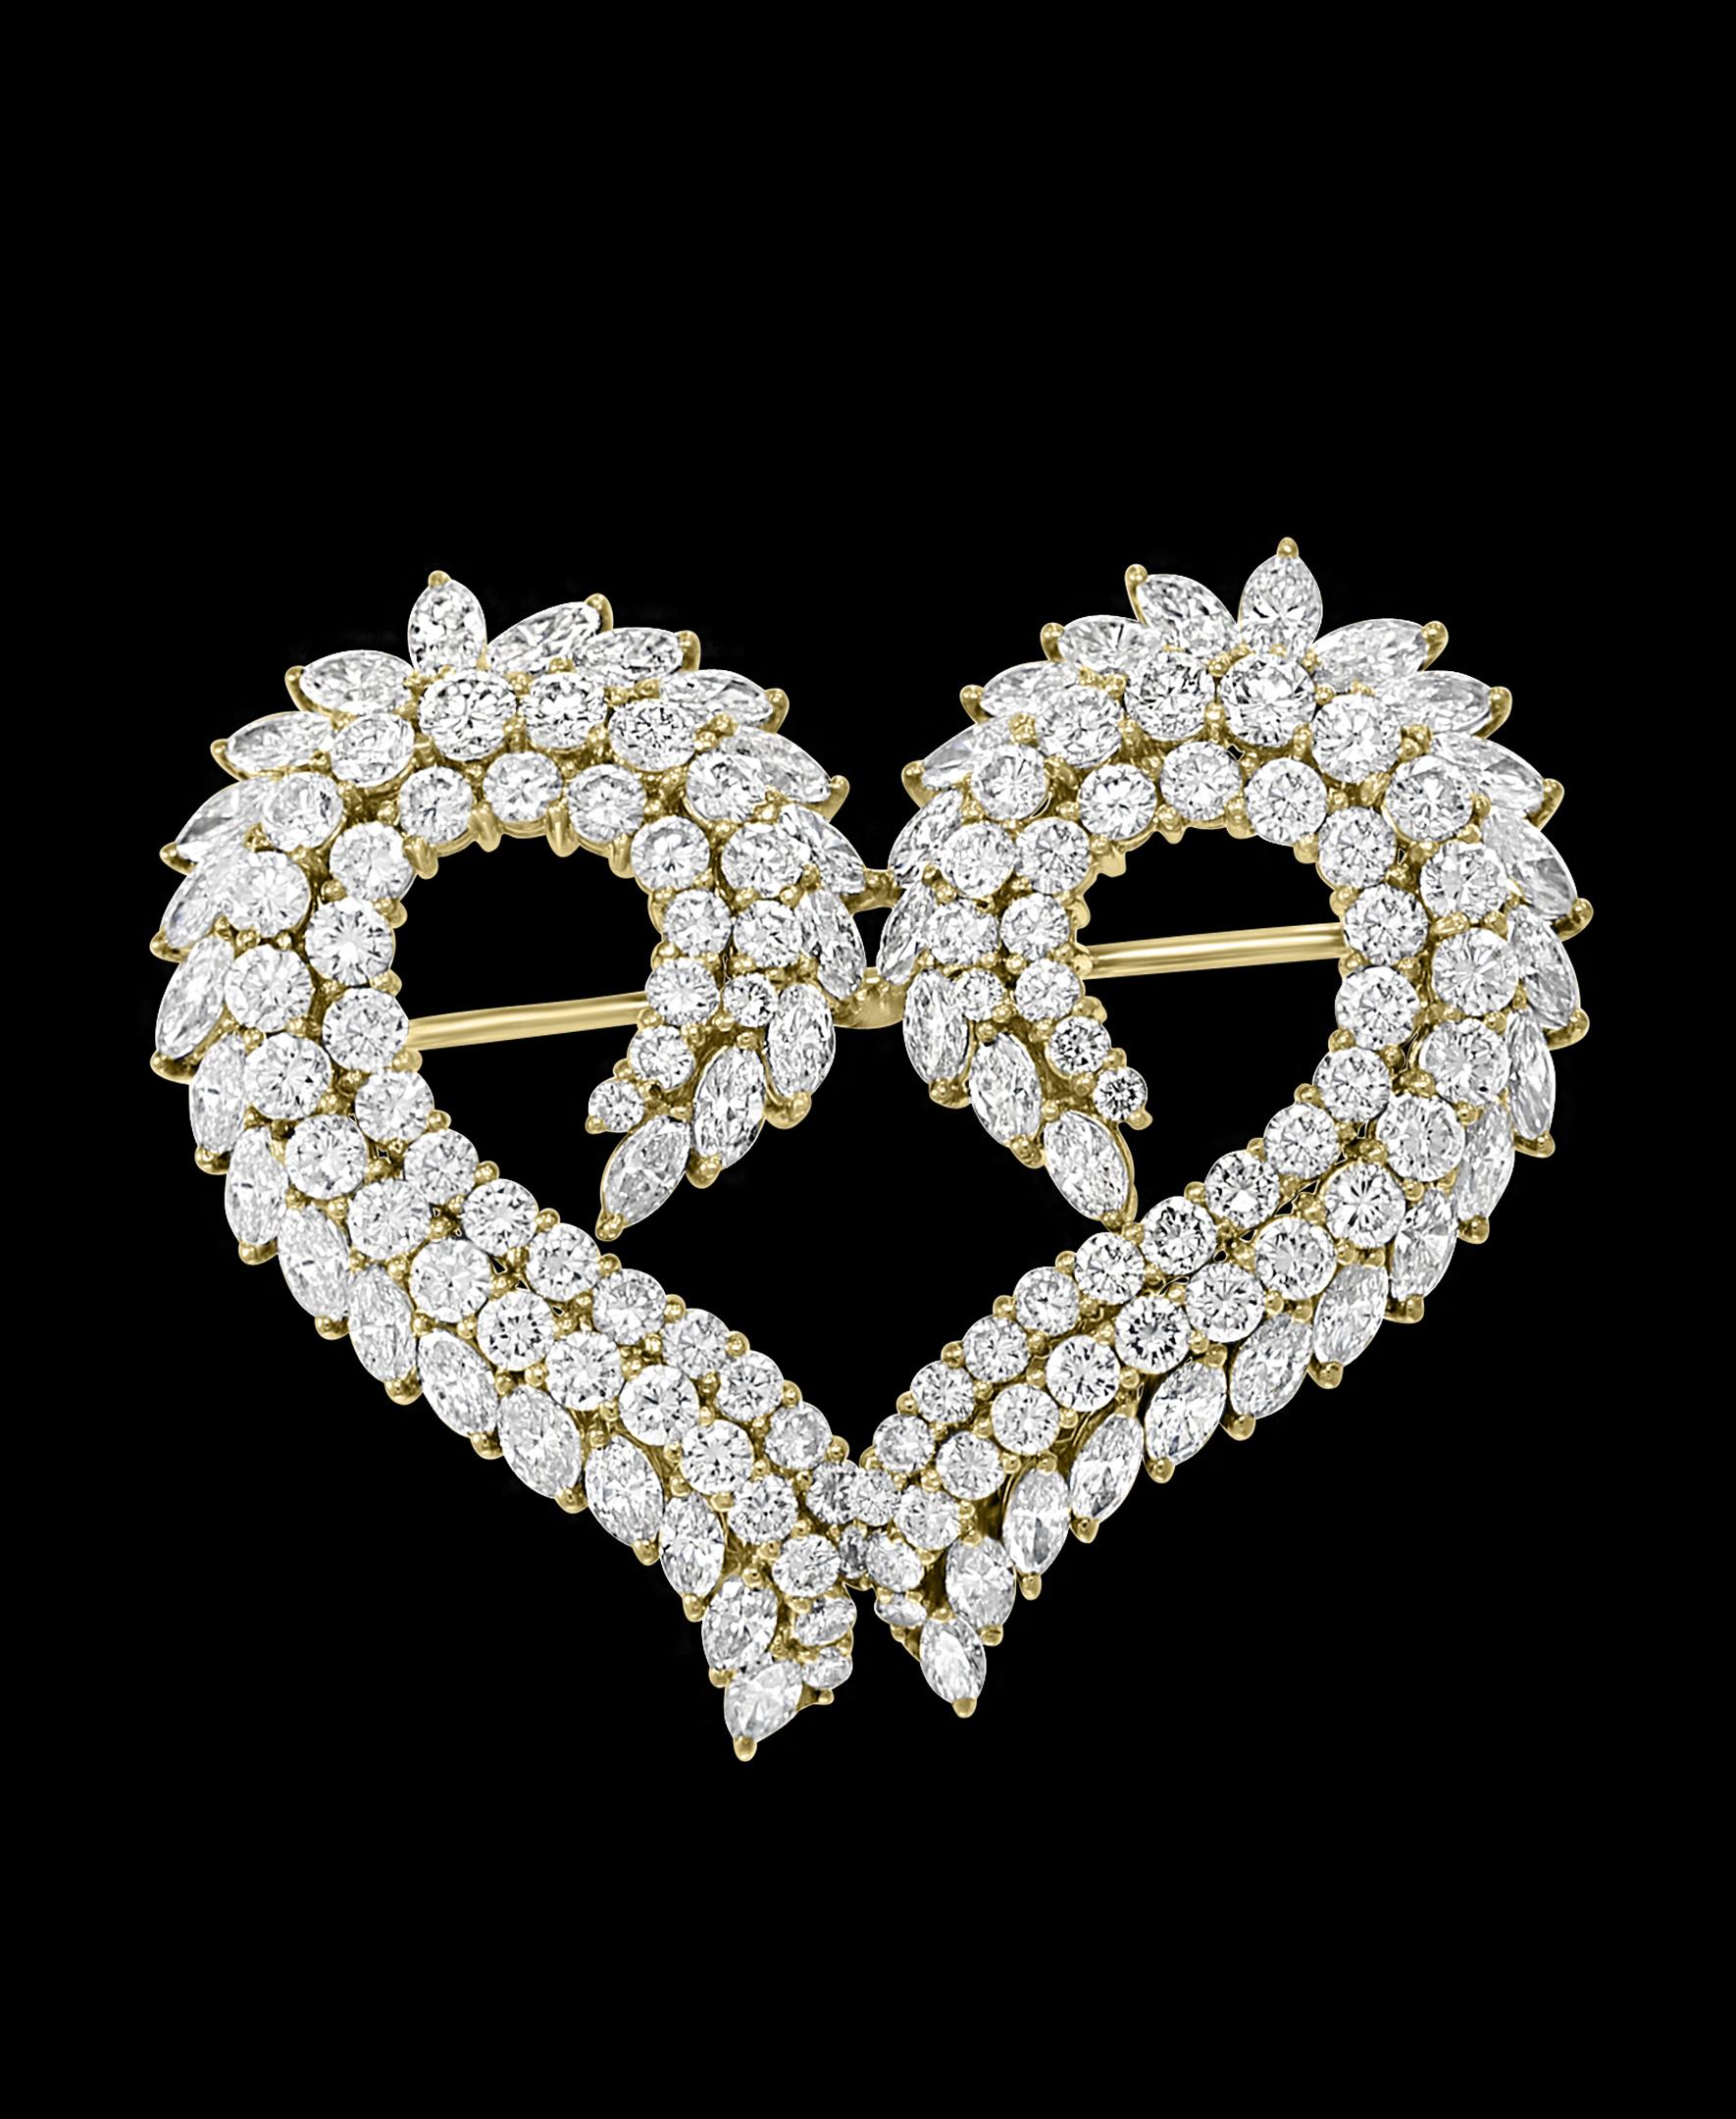  Antique Heart Shaped Diamond 18 Karat Gold Pin/Broach, VS Quality
Set with two rows of round diamonds and one row of Marquis diamond   in open back Prong settings with a combined approximate weight of 9.50 carats, to a gently curving heart shape